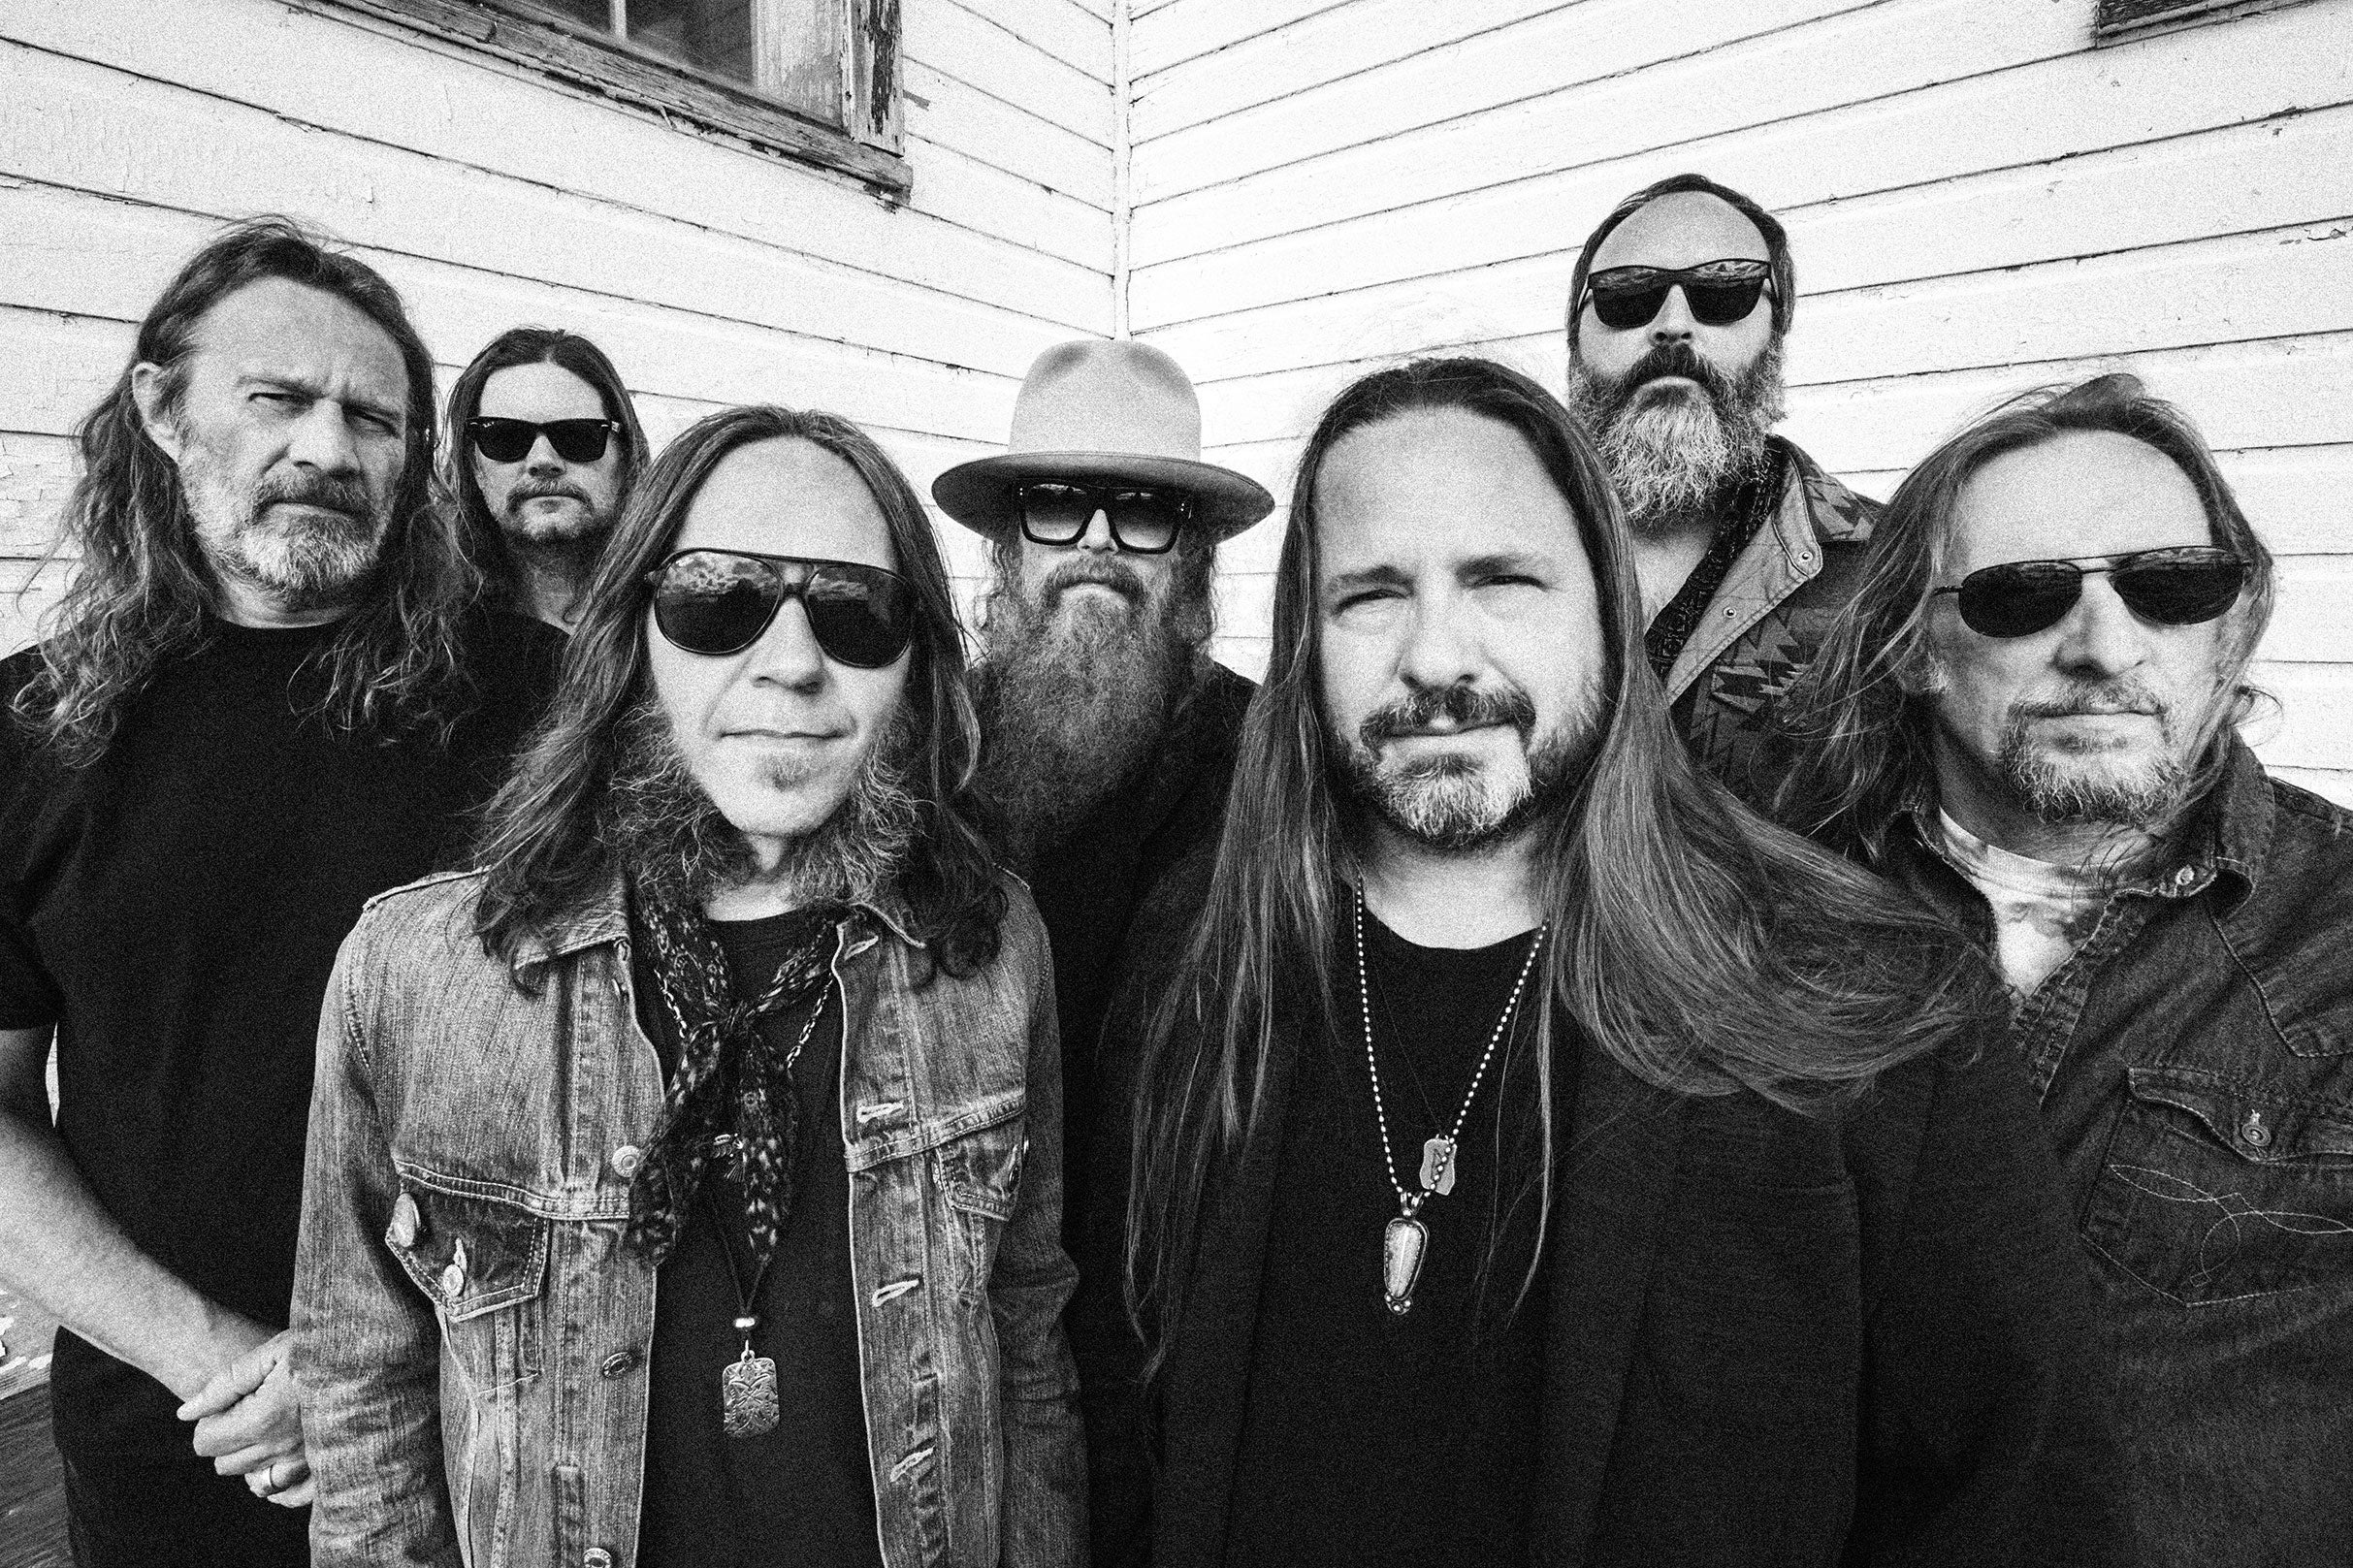 Blackberry Smoke: Be Right Here Tour free pre-sale c0de for early tickets in Boston